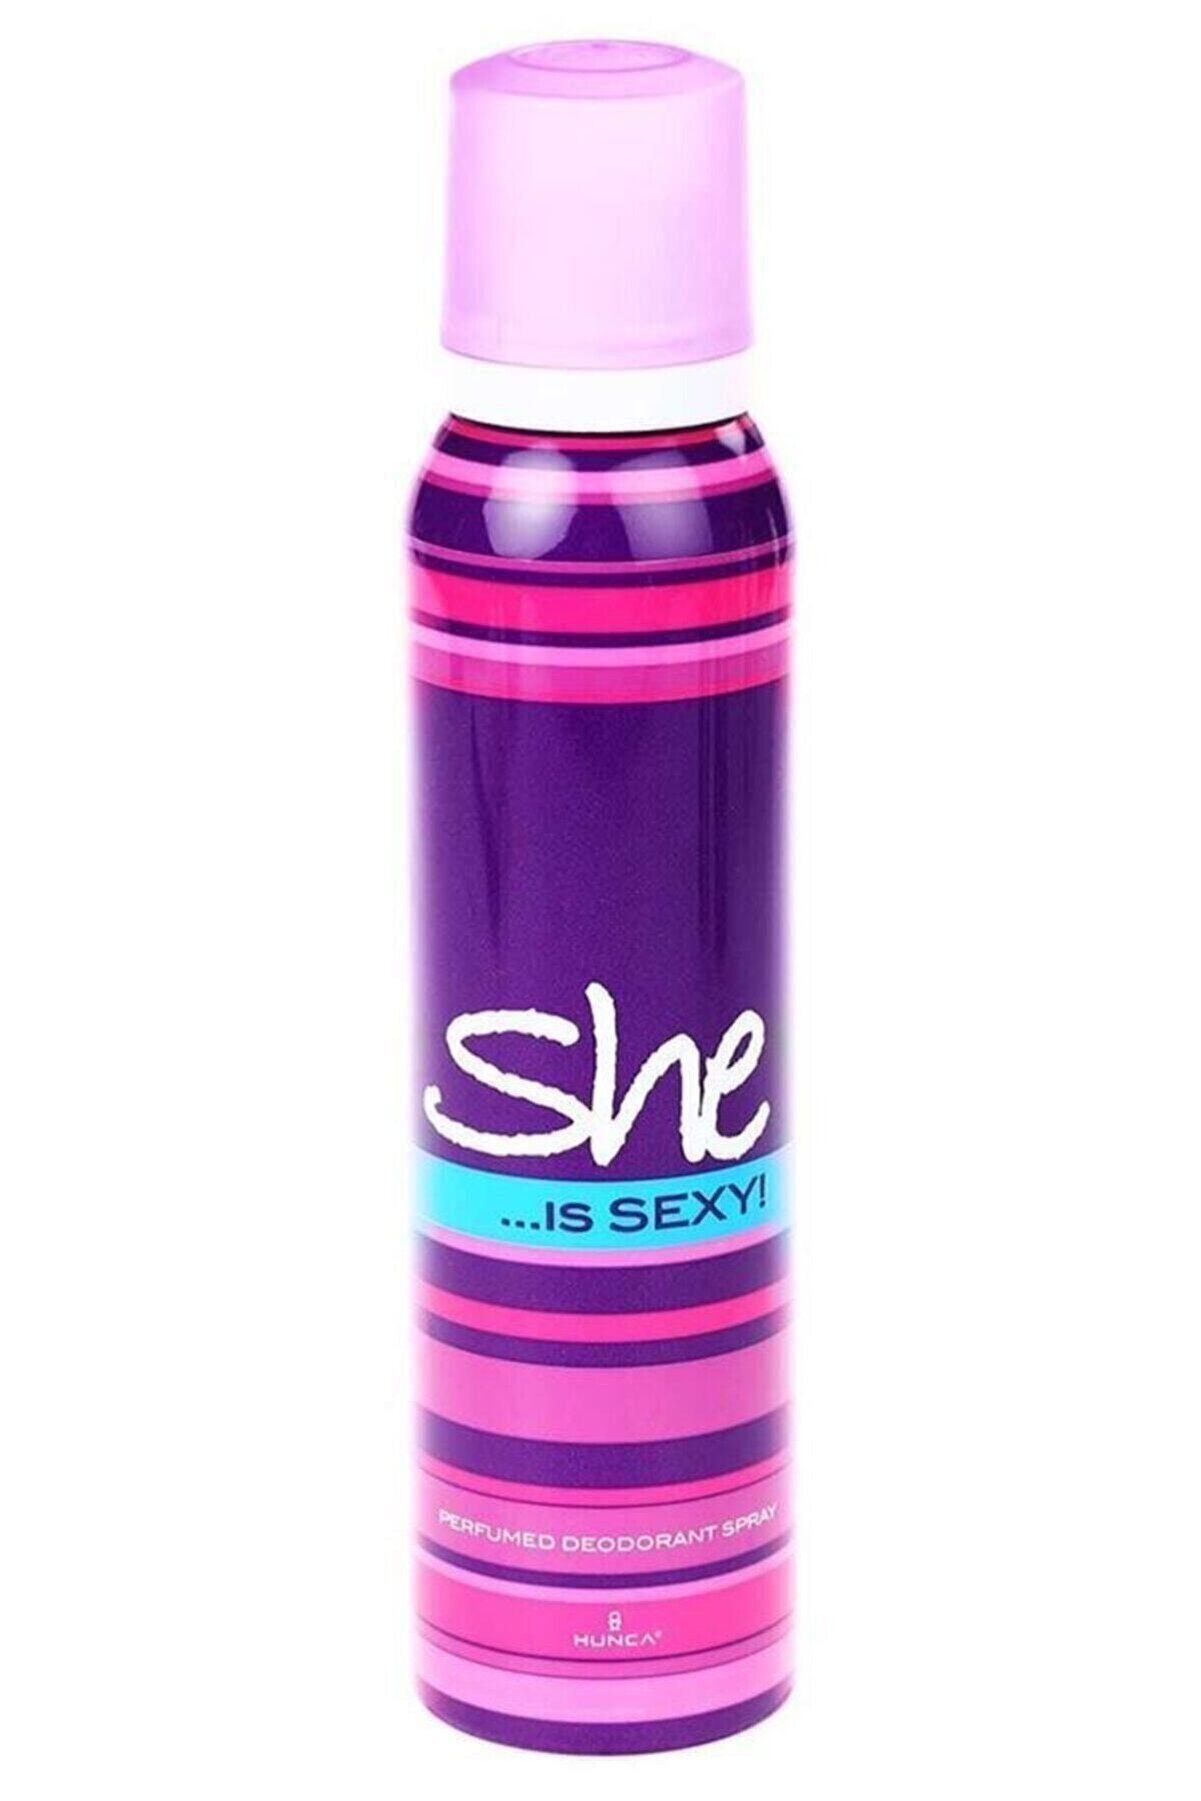 She Deo 150ml Is Sexy